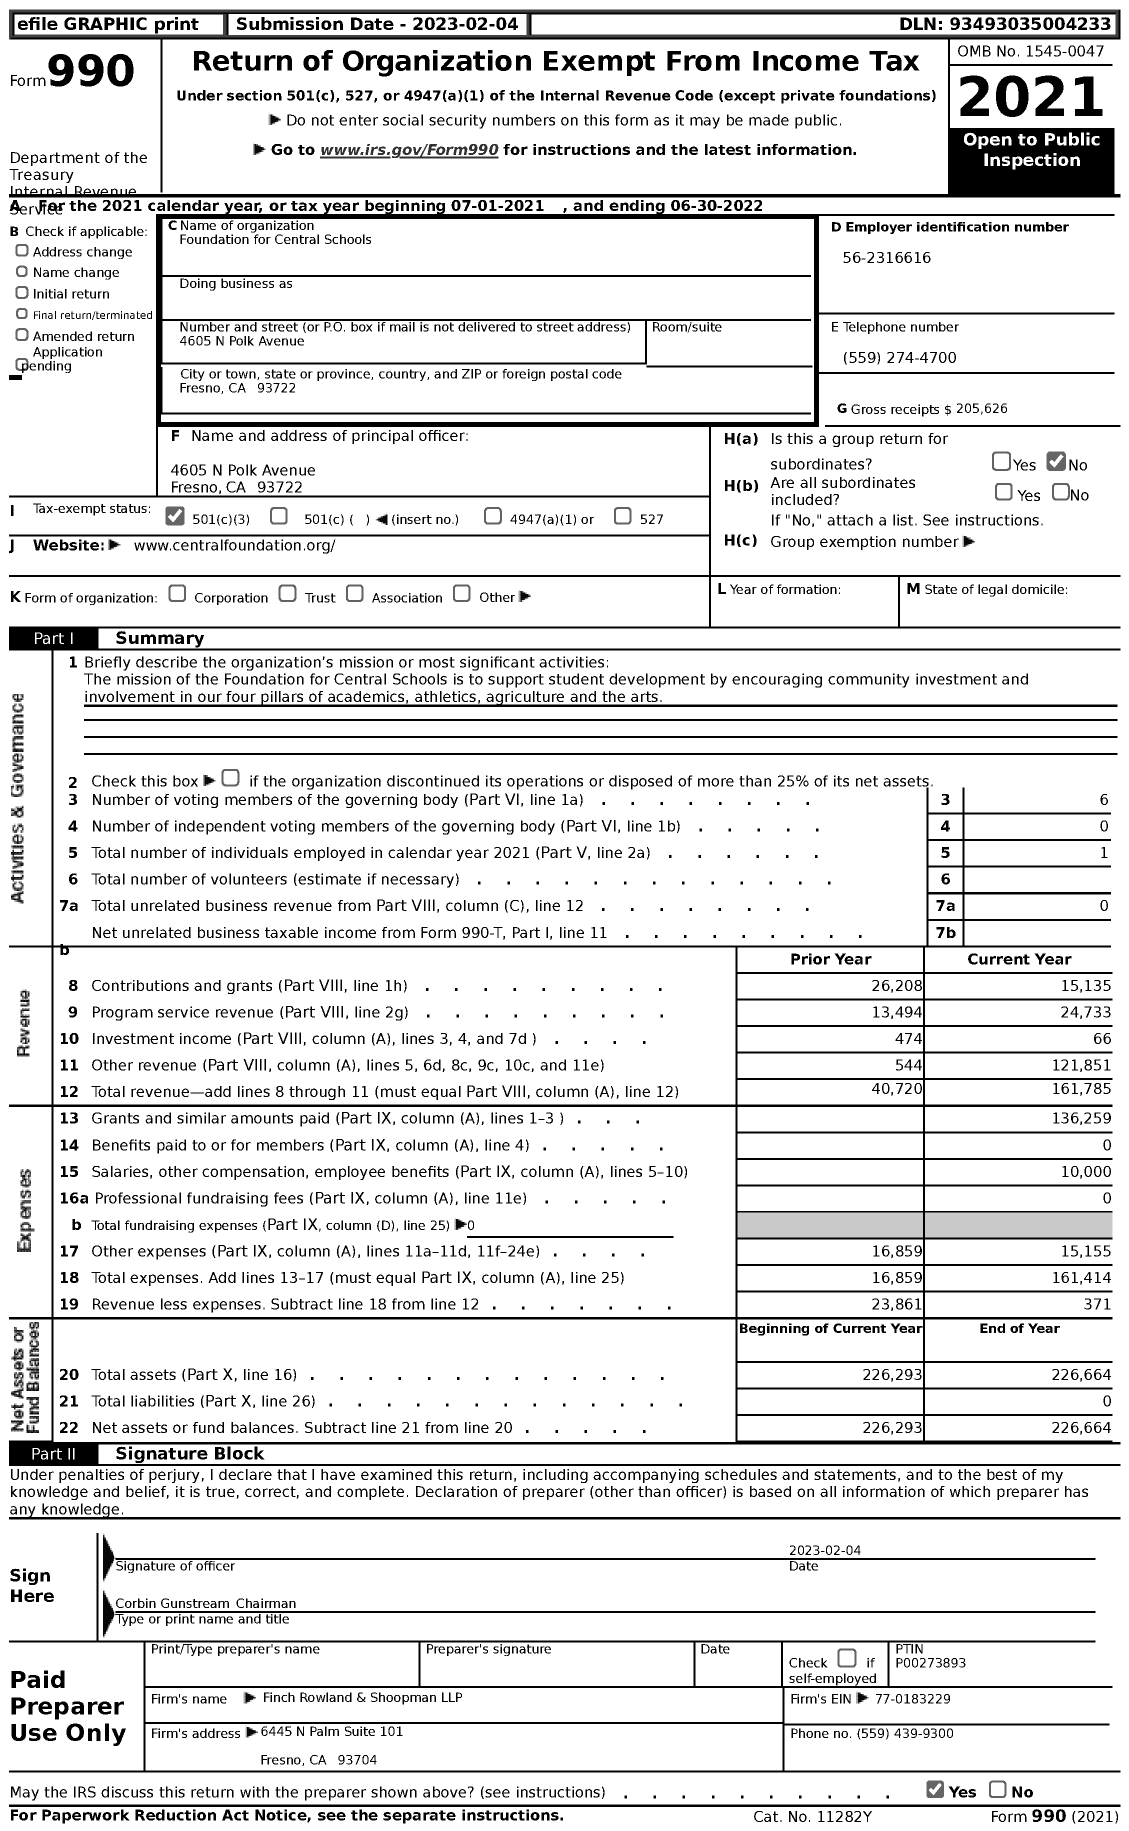 Image of first page of 2021 Form 990 for Foundation for Central Schools